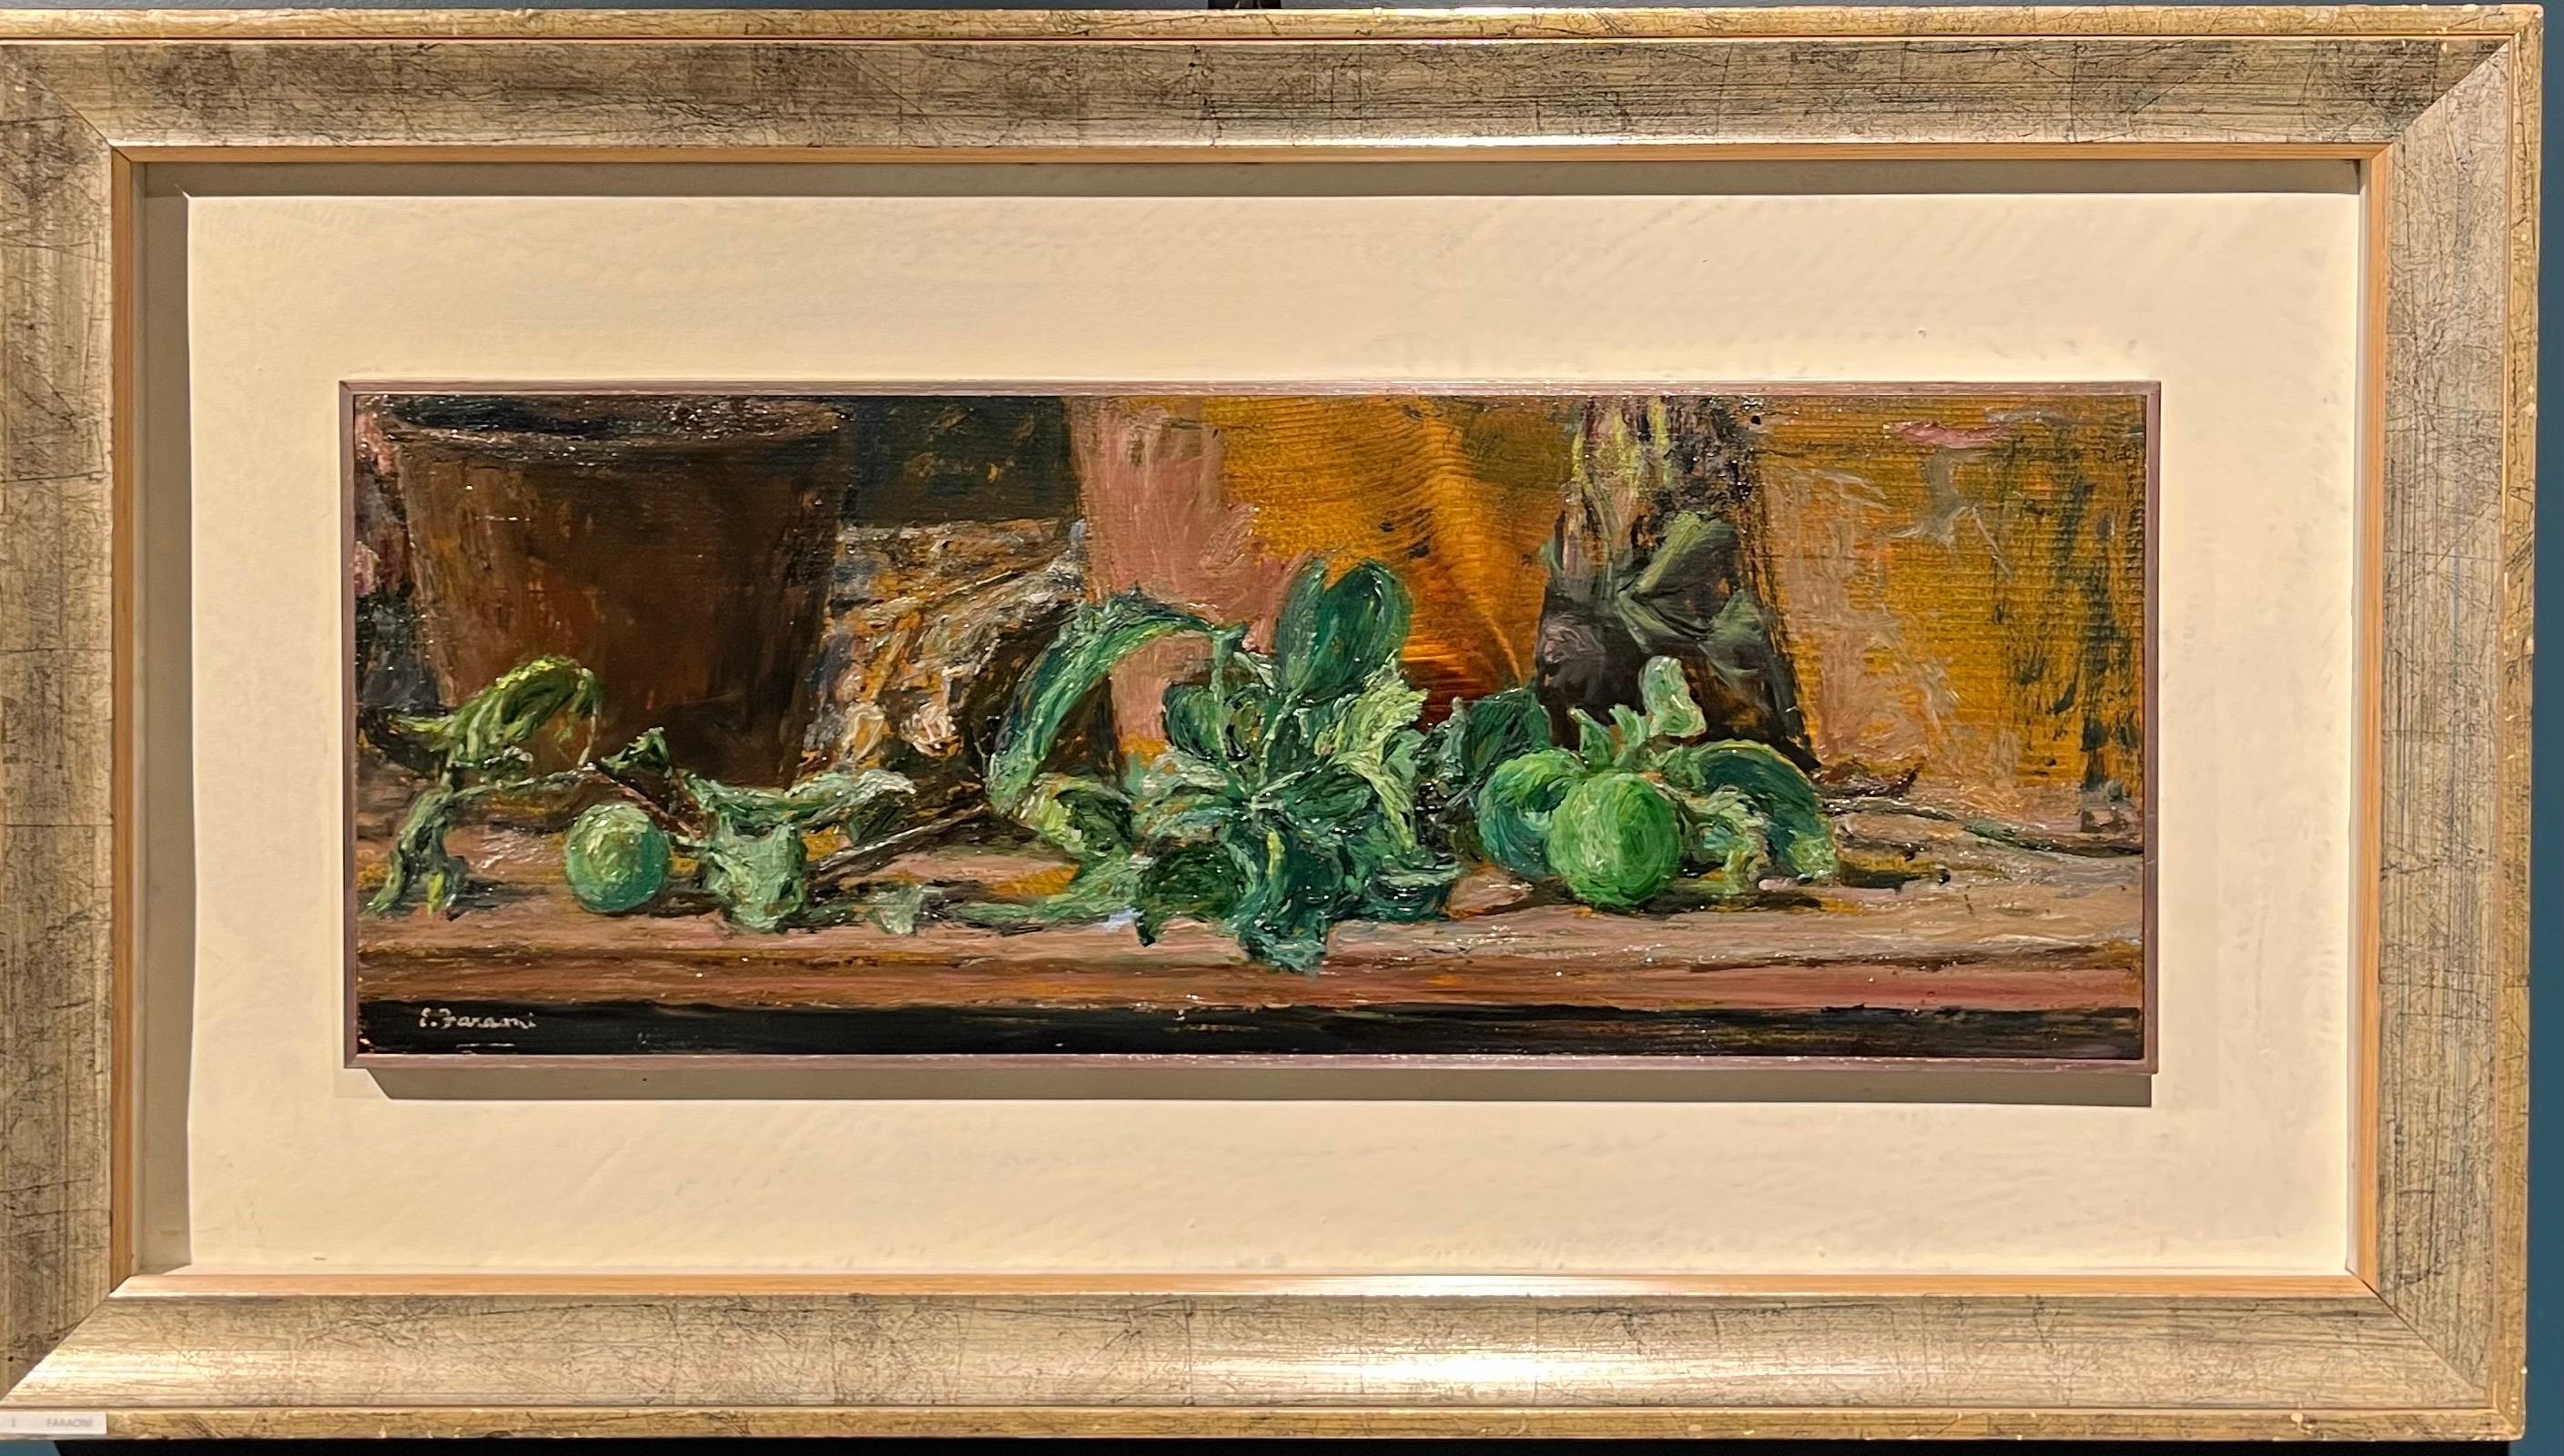 "Green apples on the table" Oil on wood cm. 63 x 25 1970